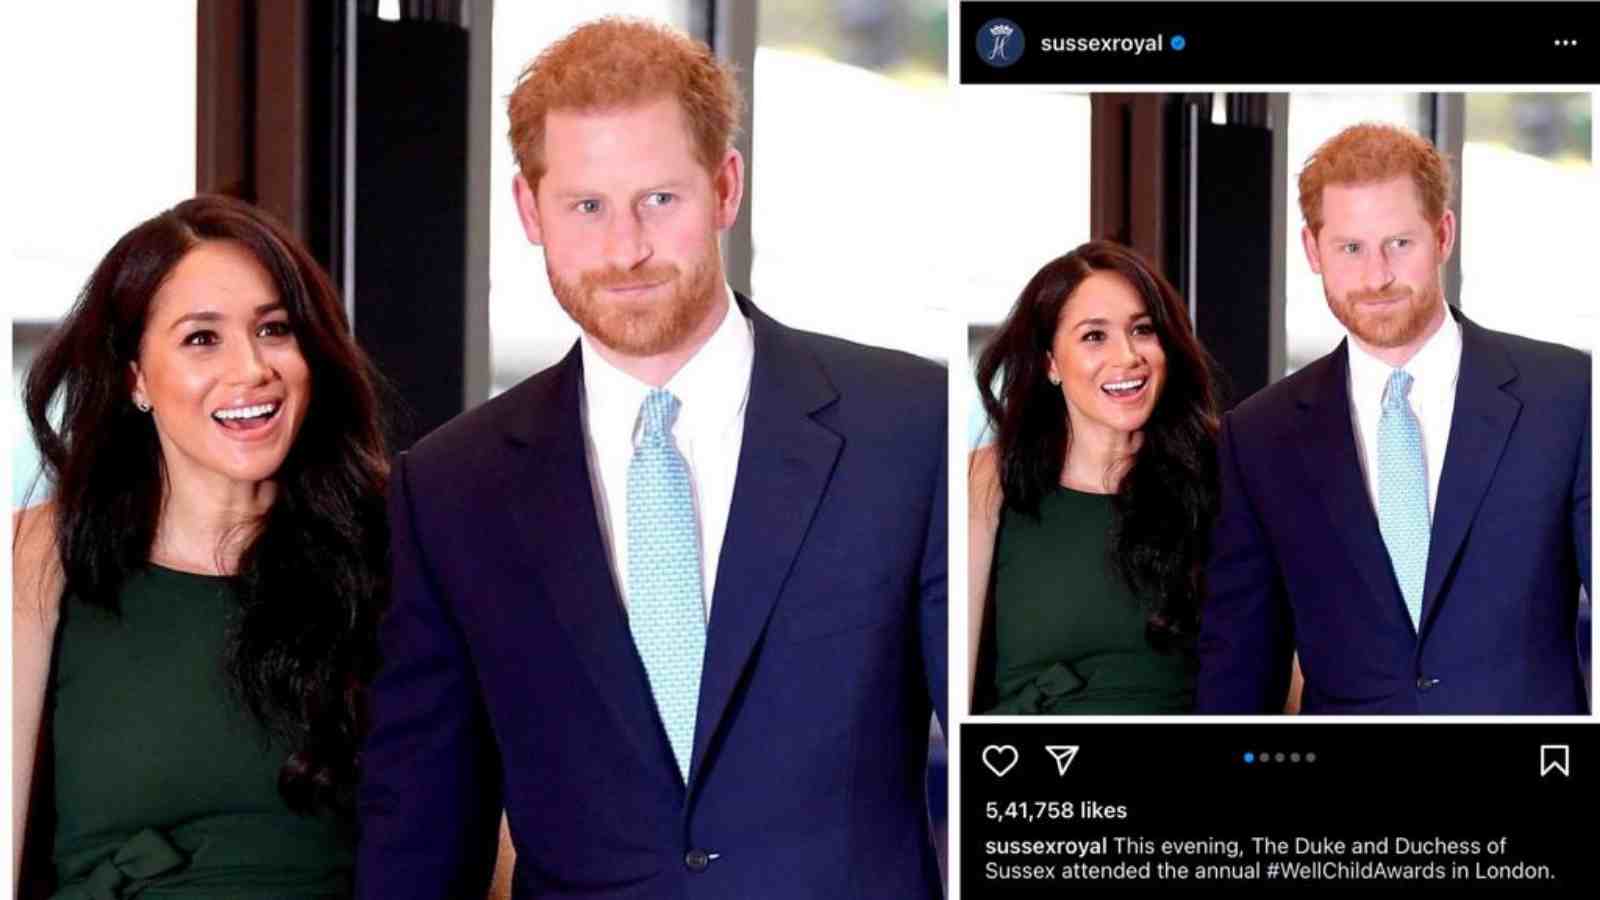 Meghan Markle reveals the reason behind opening the joint Instagram handle with Prince Harry 